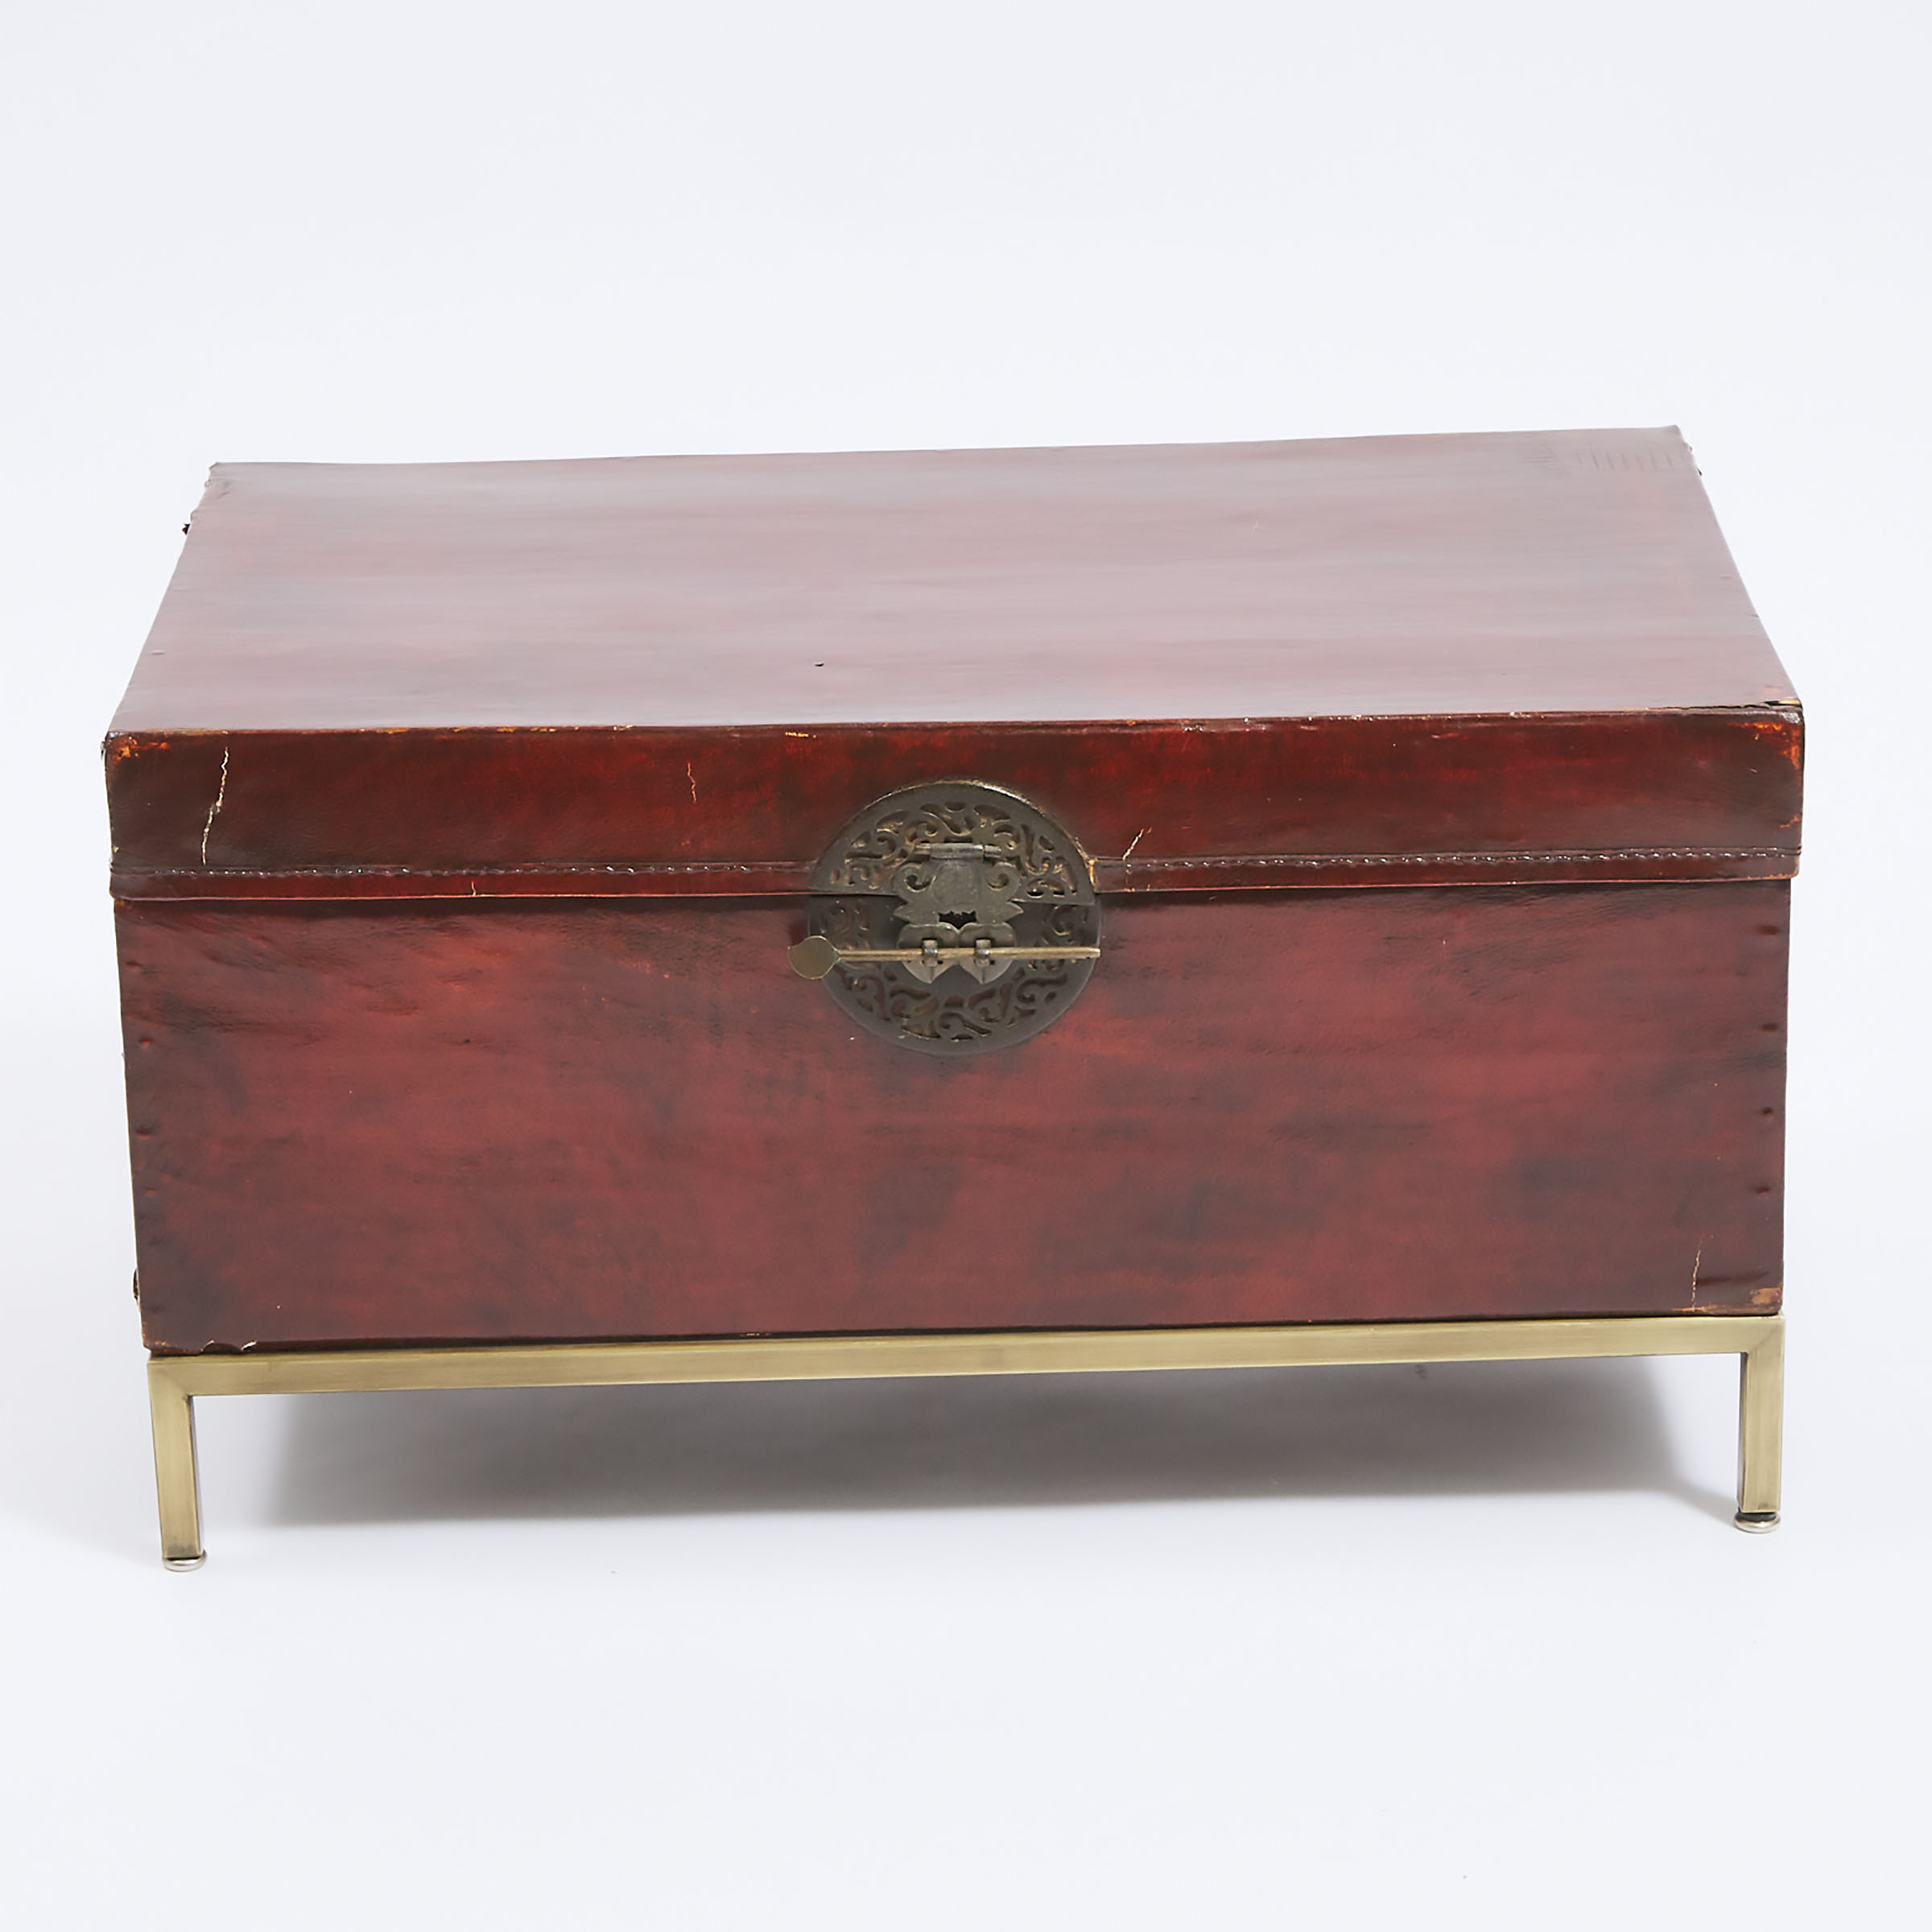 A Chinese Red Lacquered Pigskin Leather Wrapped Wood Chest, Late 19th/Early 20th Century, 晚清 红漆皮箱, o - Image 2 of 4